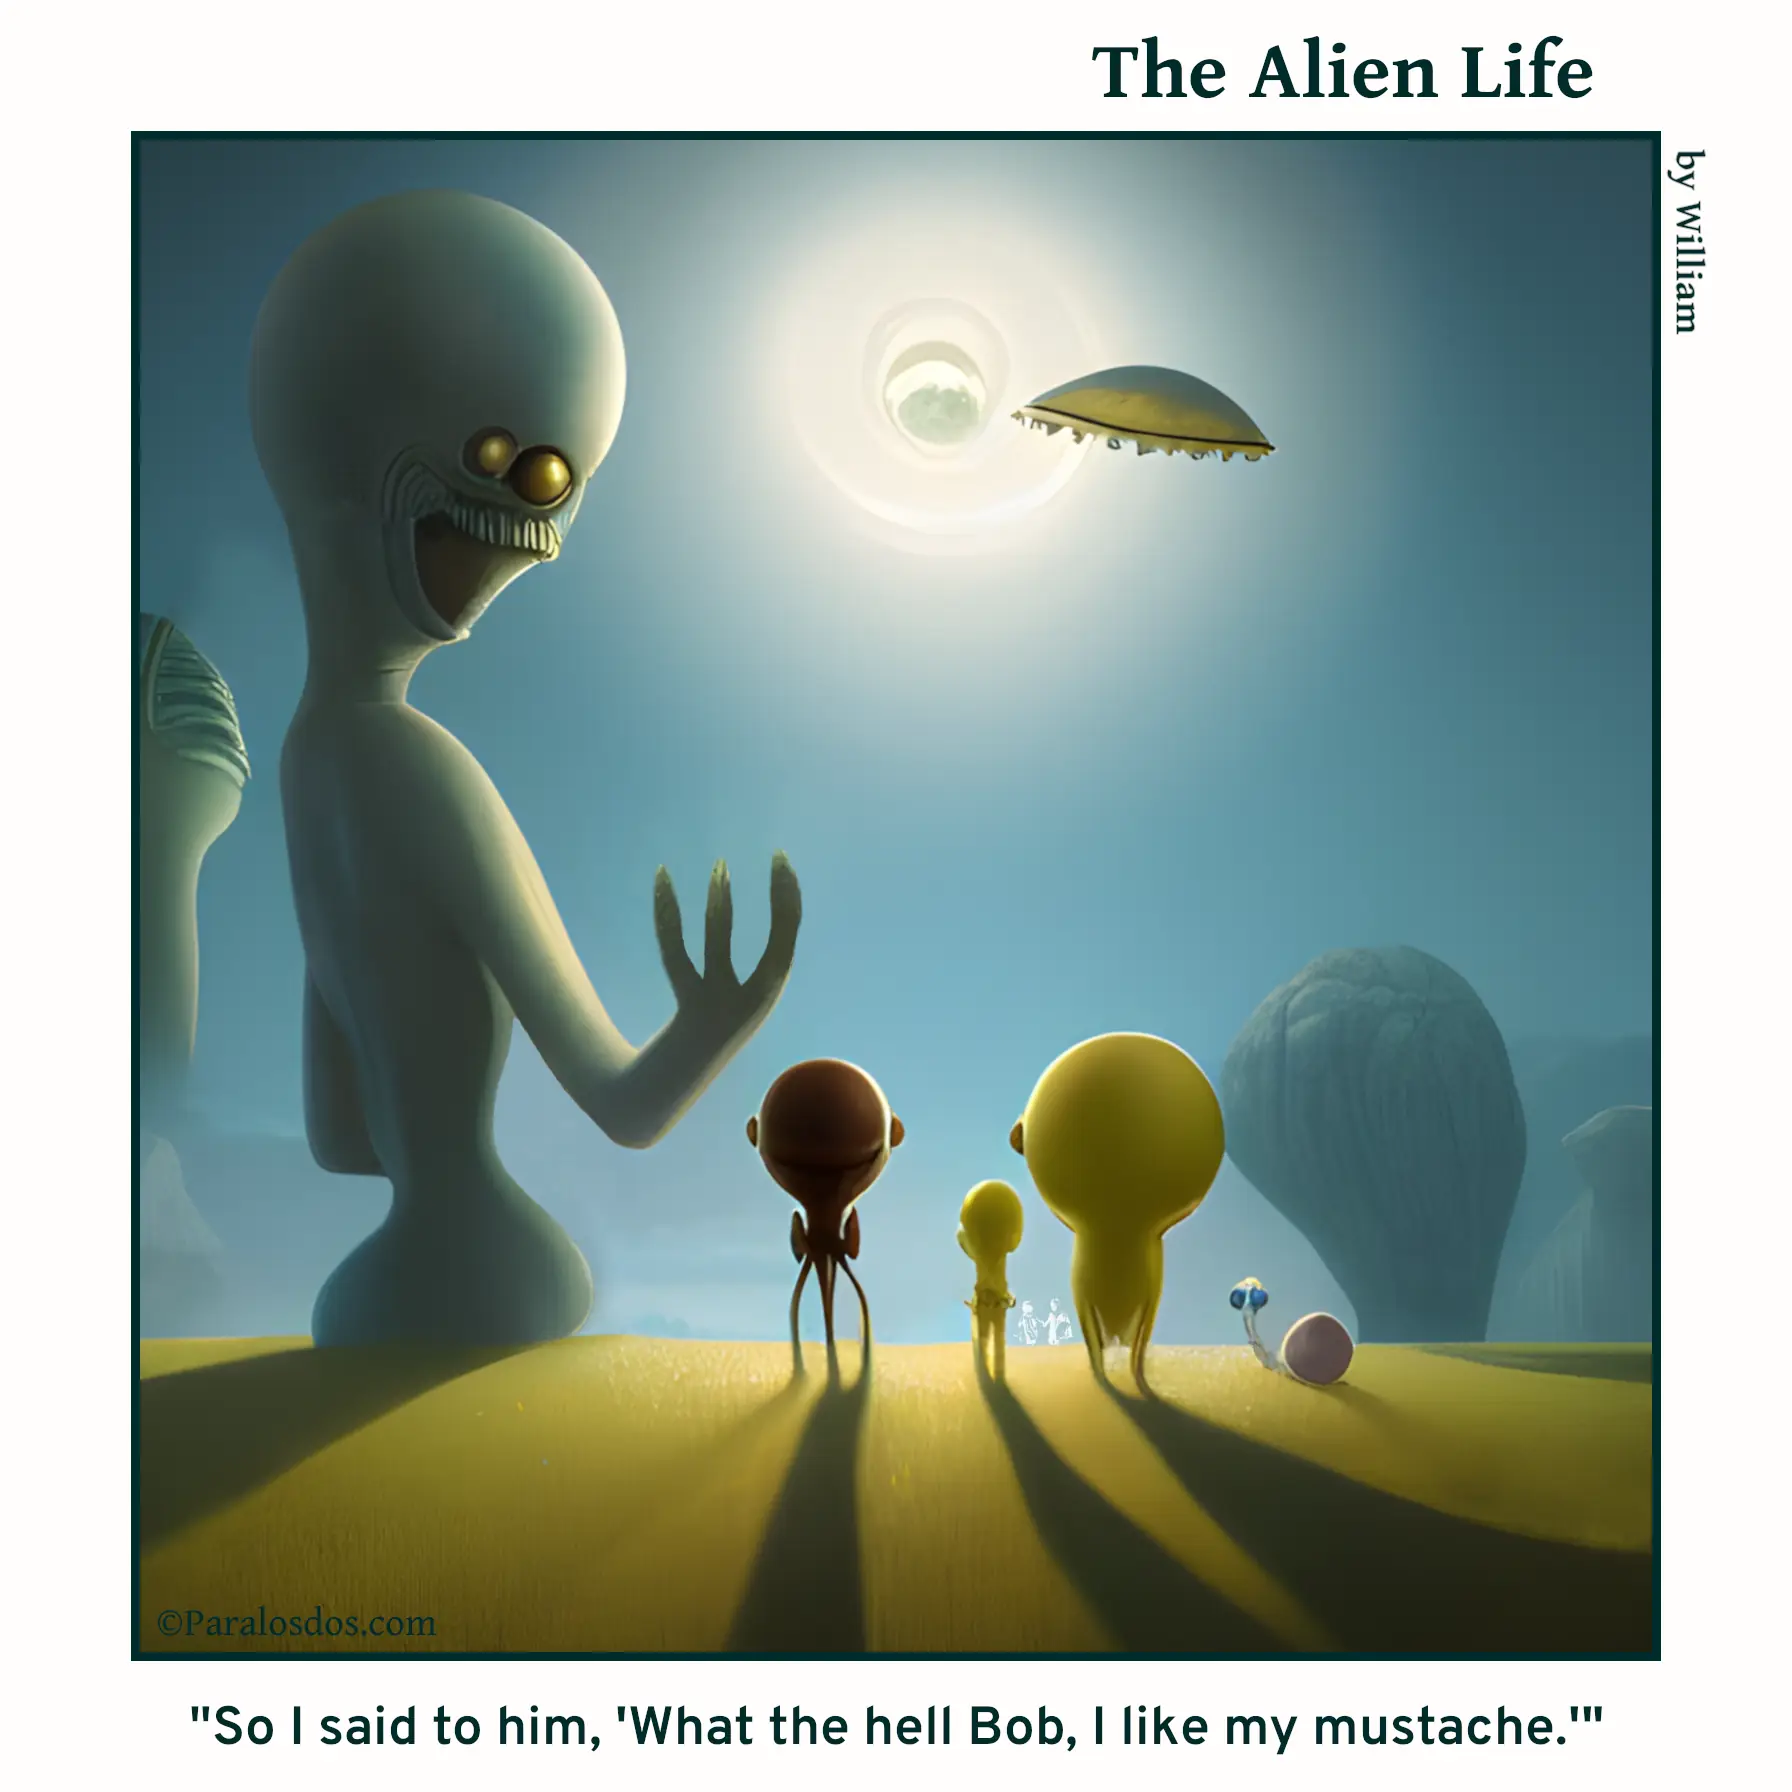 The Alien Life, one panel Comic. Aliens are standing around chatting. One is much bigger than the rest. He has a very weird mustache. The caption reads: "So I said to him, 'What the hell Bob, I like my mustache.'"